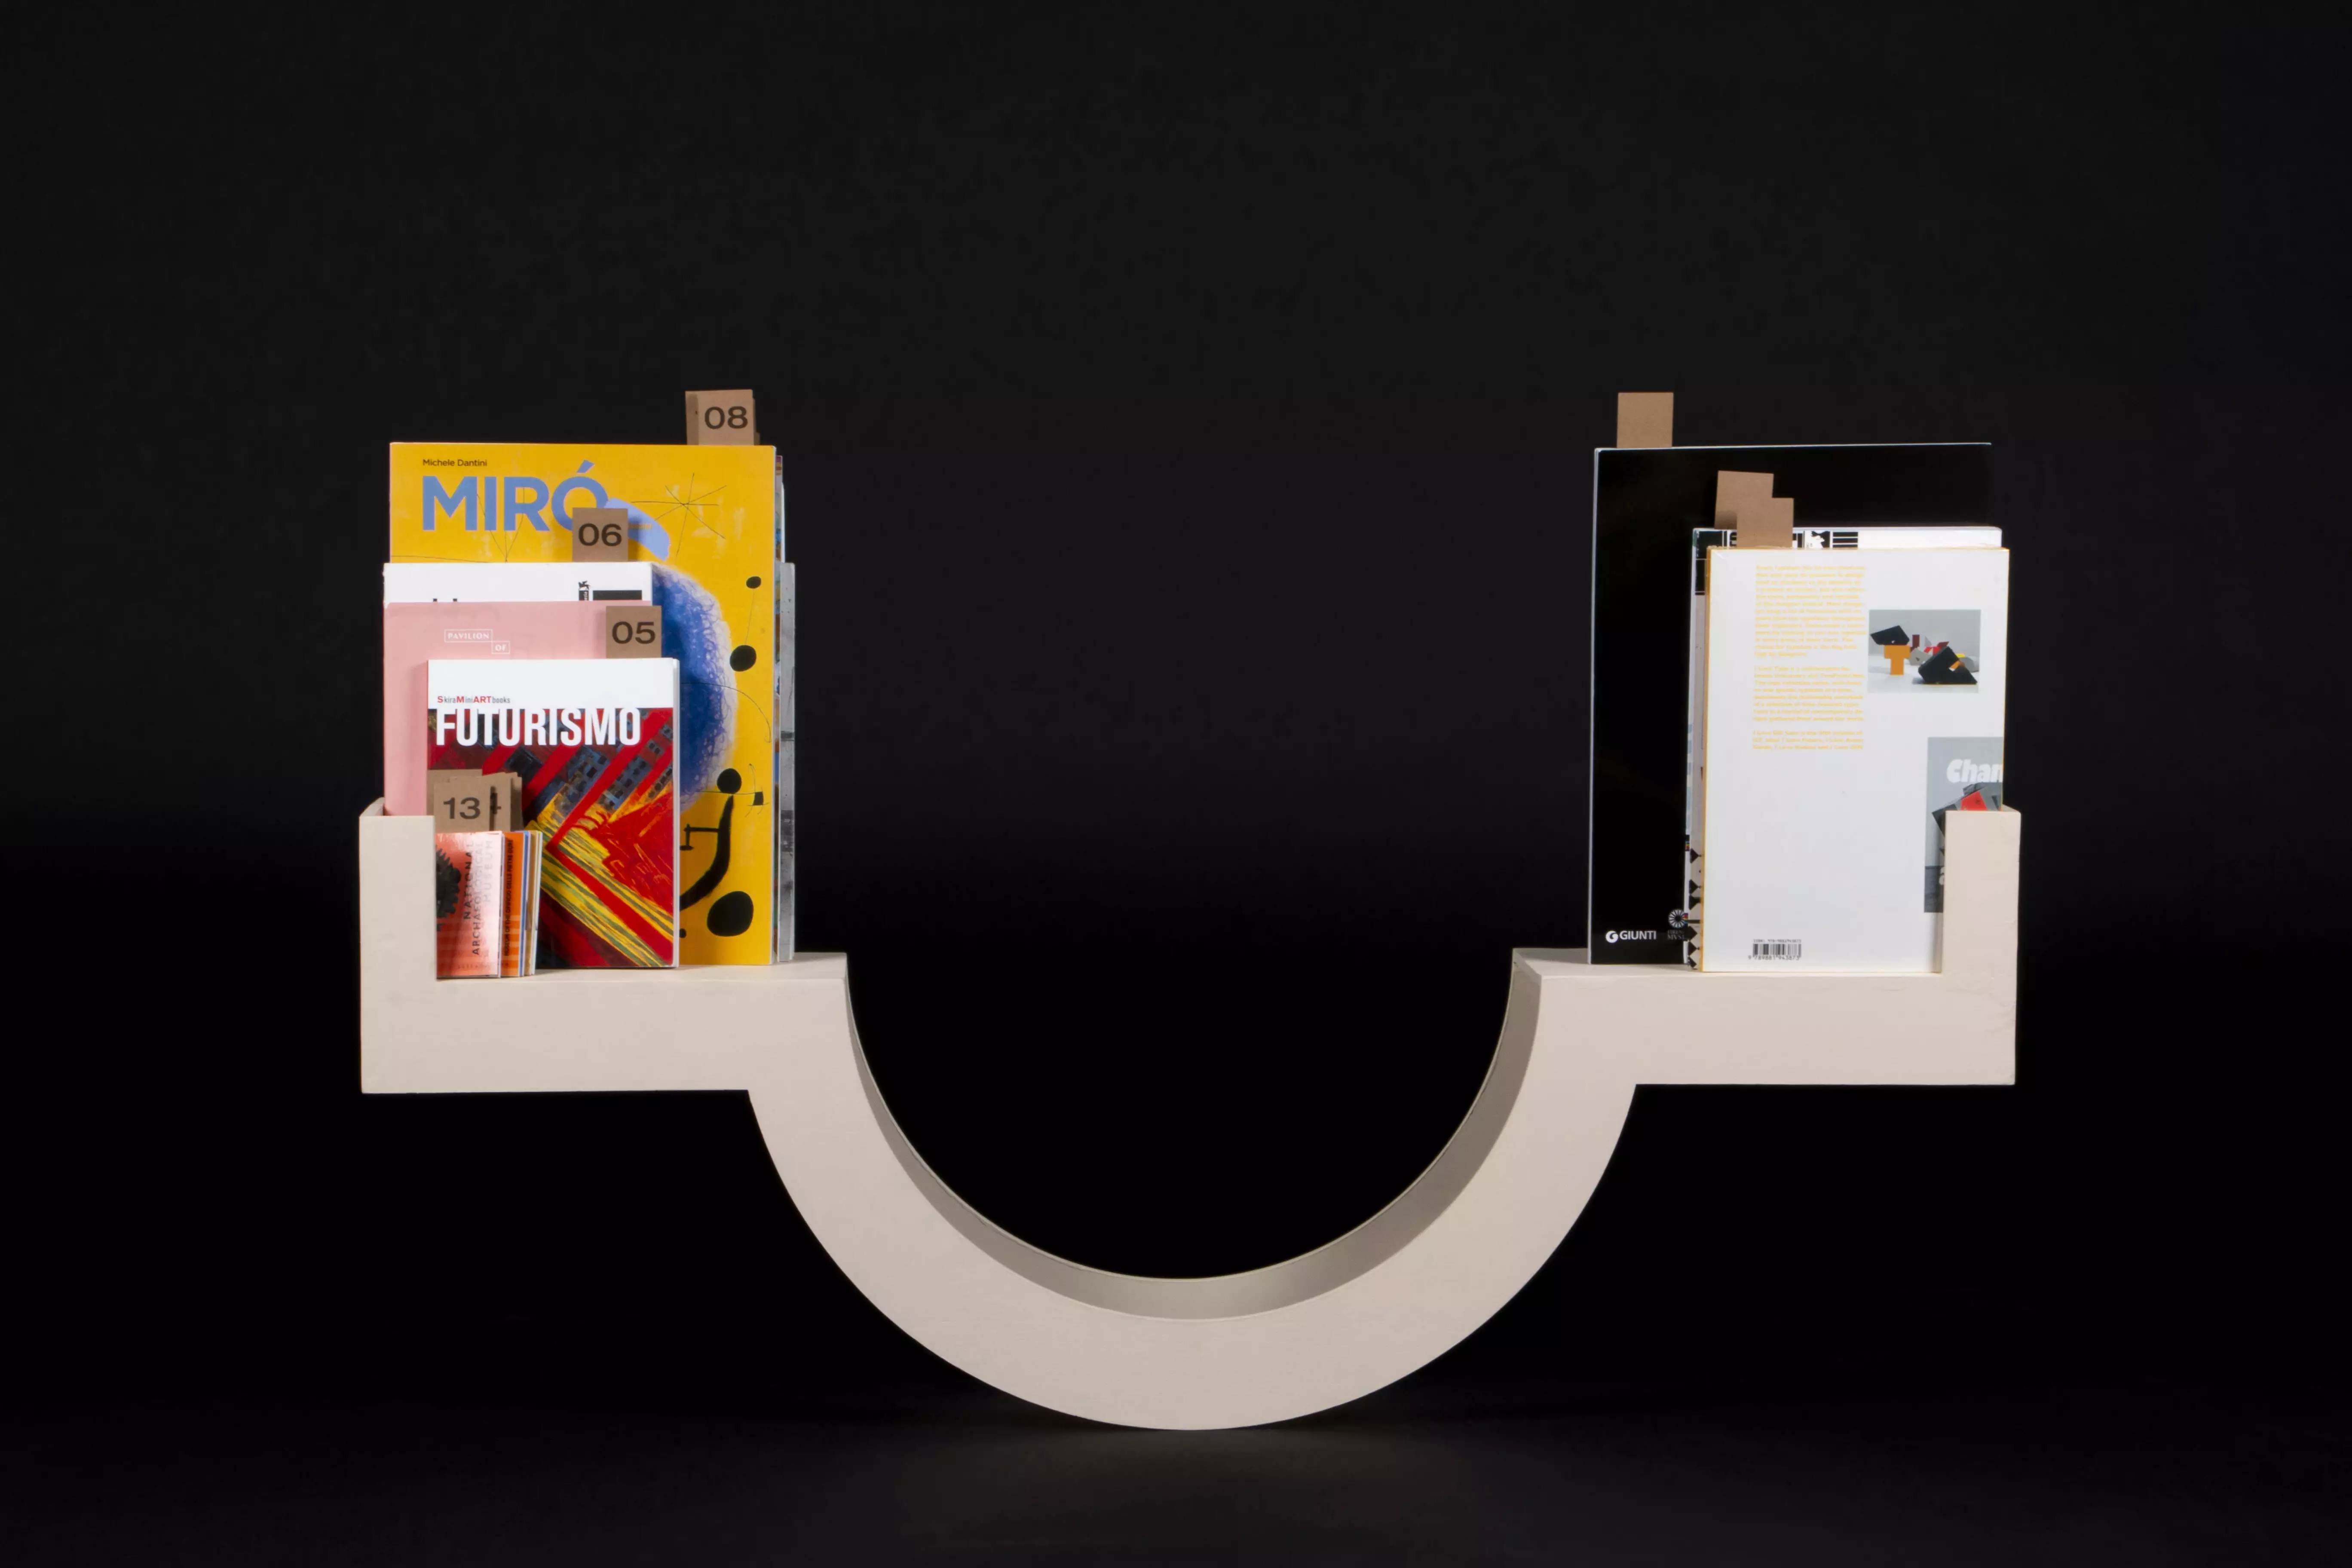 A see-saw style bookshelf where the combined weight of the books on either side balance each other.